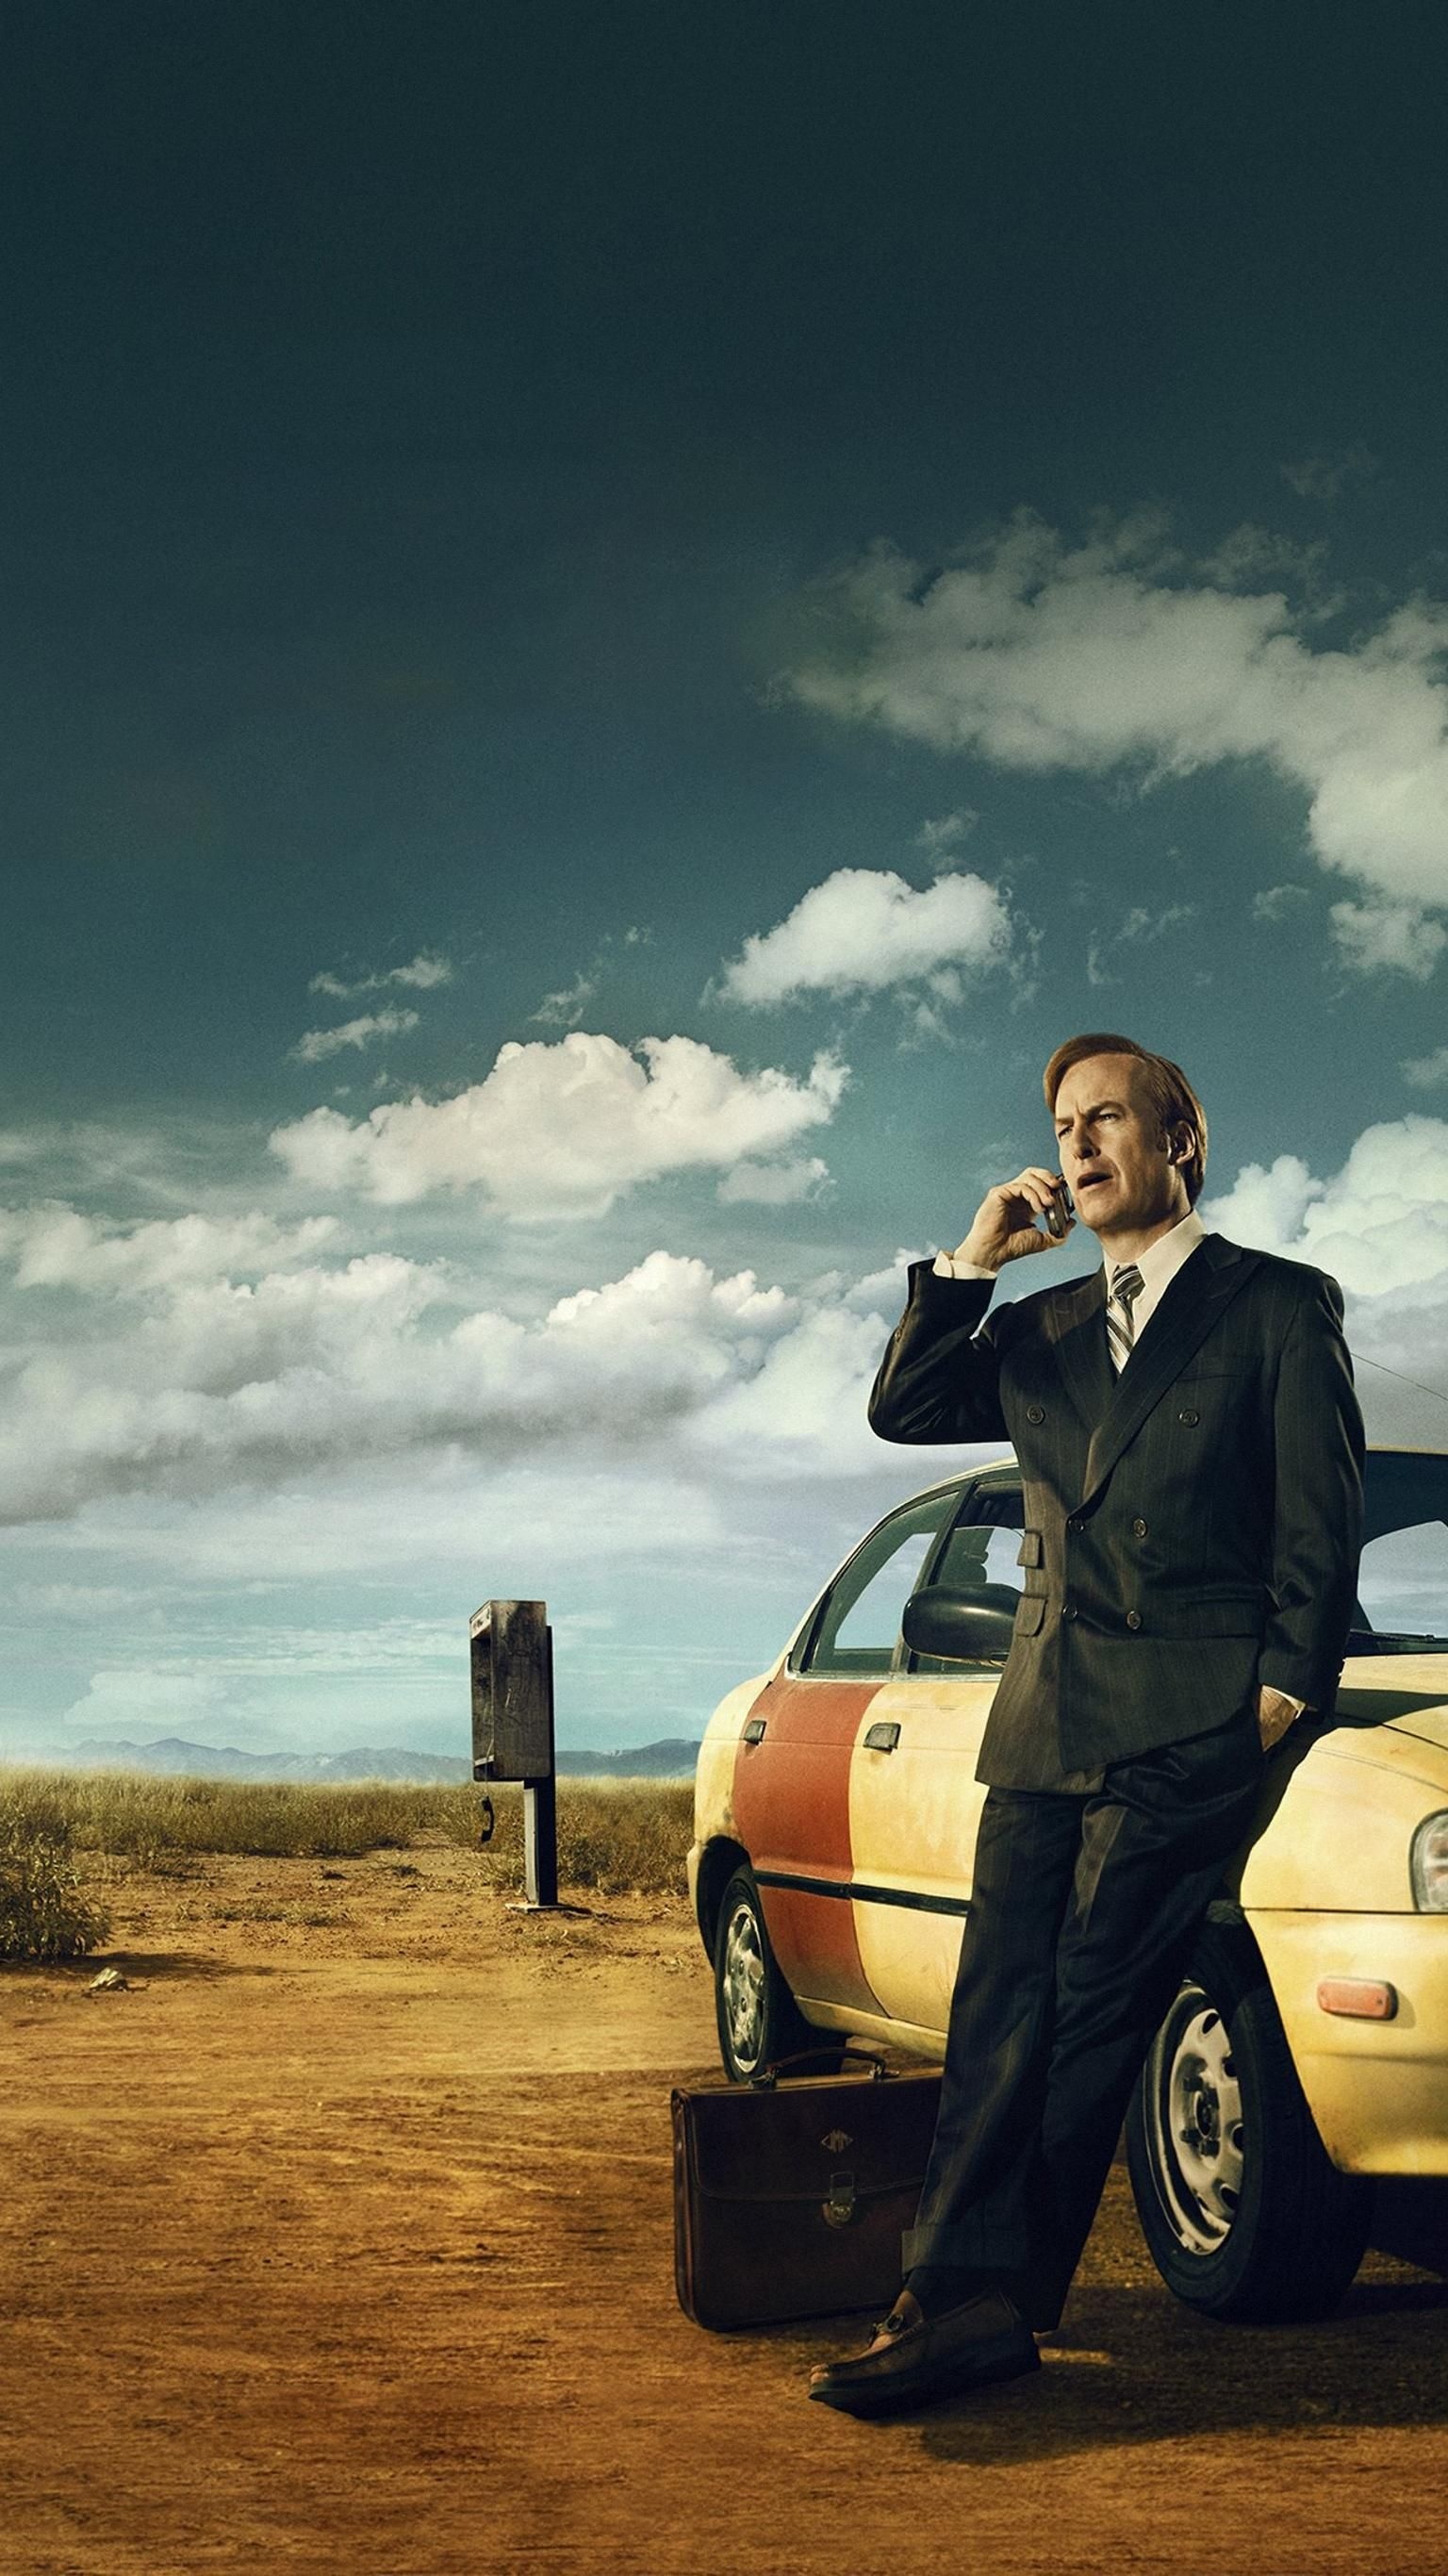 Better Call Saul wallpapers, High-quality images, HD backgrounds, Fan favorites, 1540x2740 HD Phone